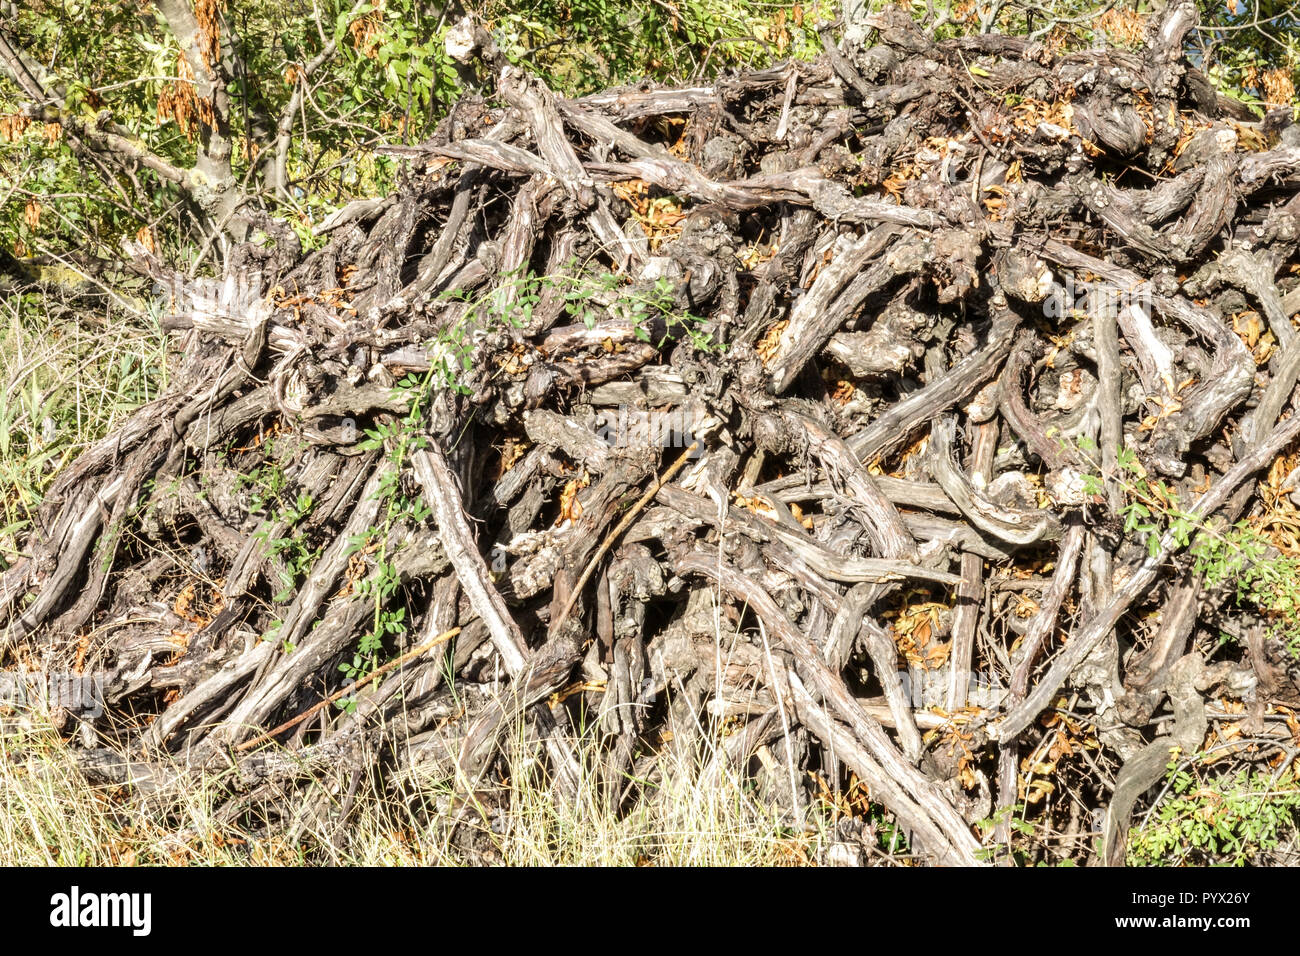 A pile of old grapevines trunks, brushwood Stock Photo